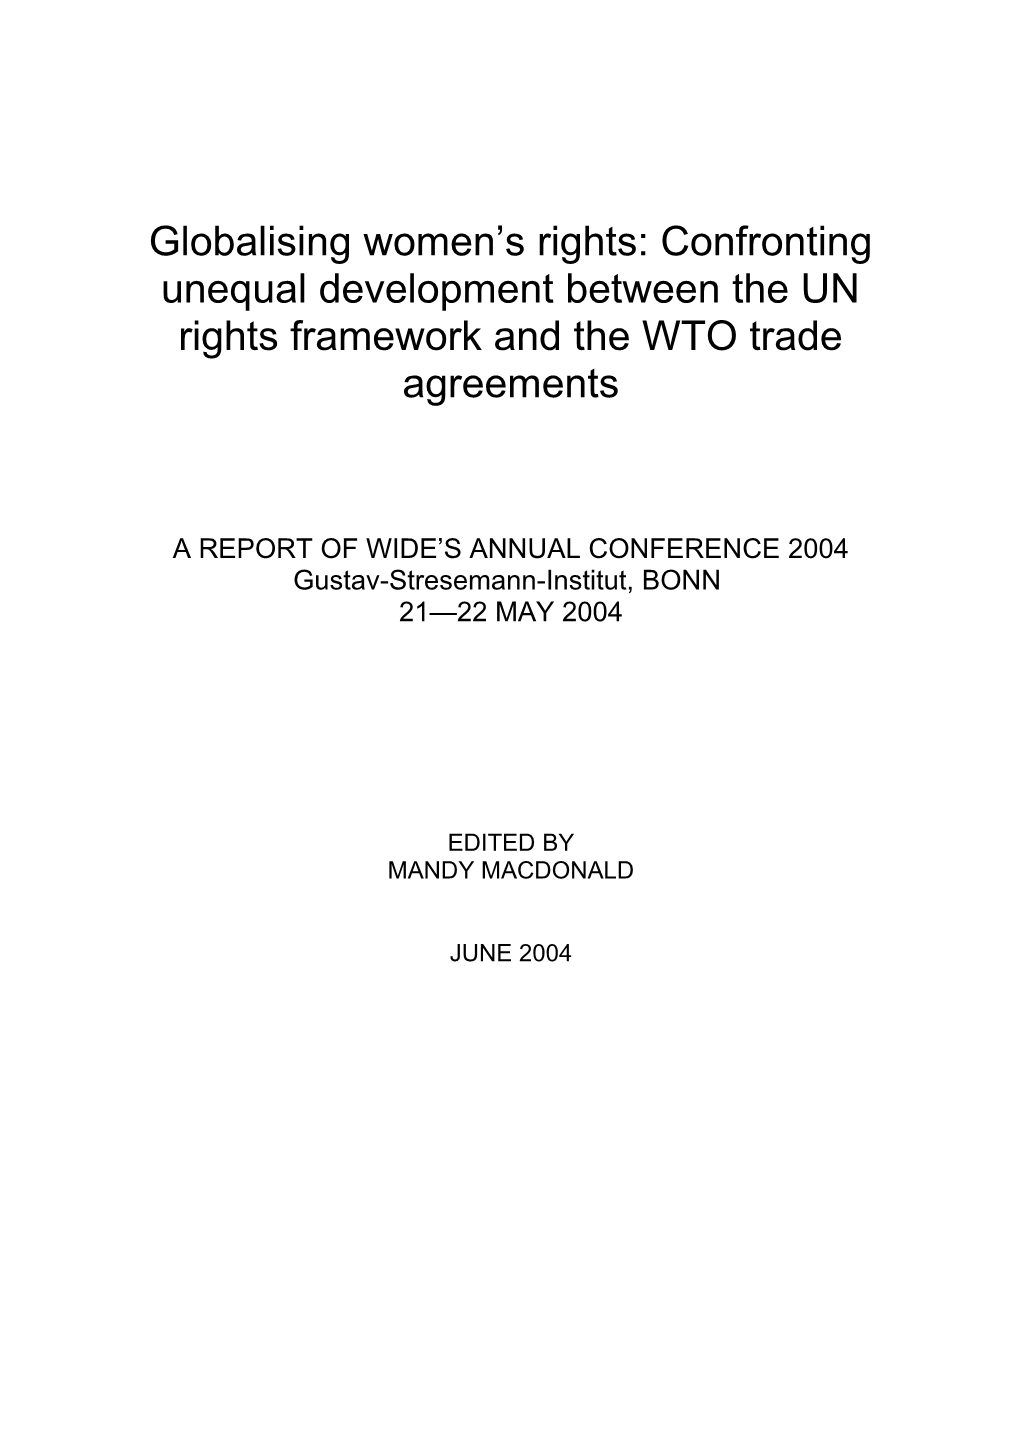 Globalising Women S Rights: Confronting Unequal Development Between the UN Rights Framework